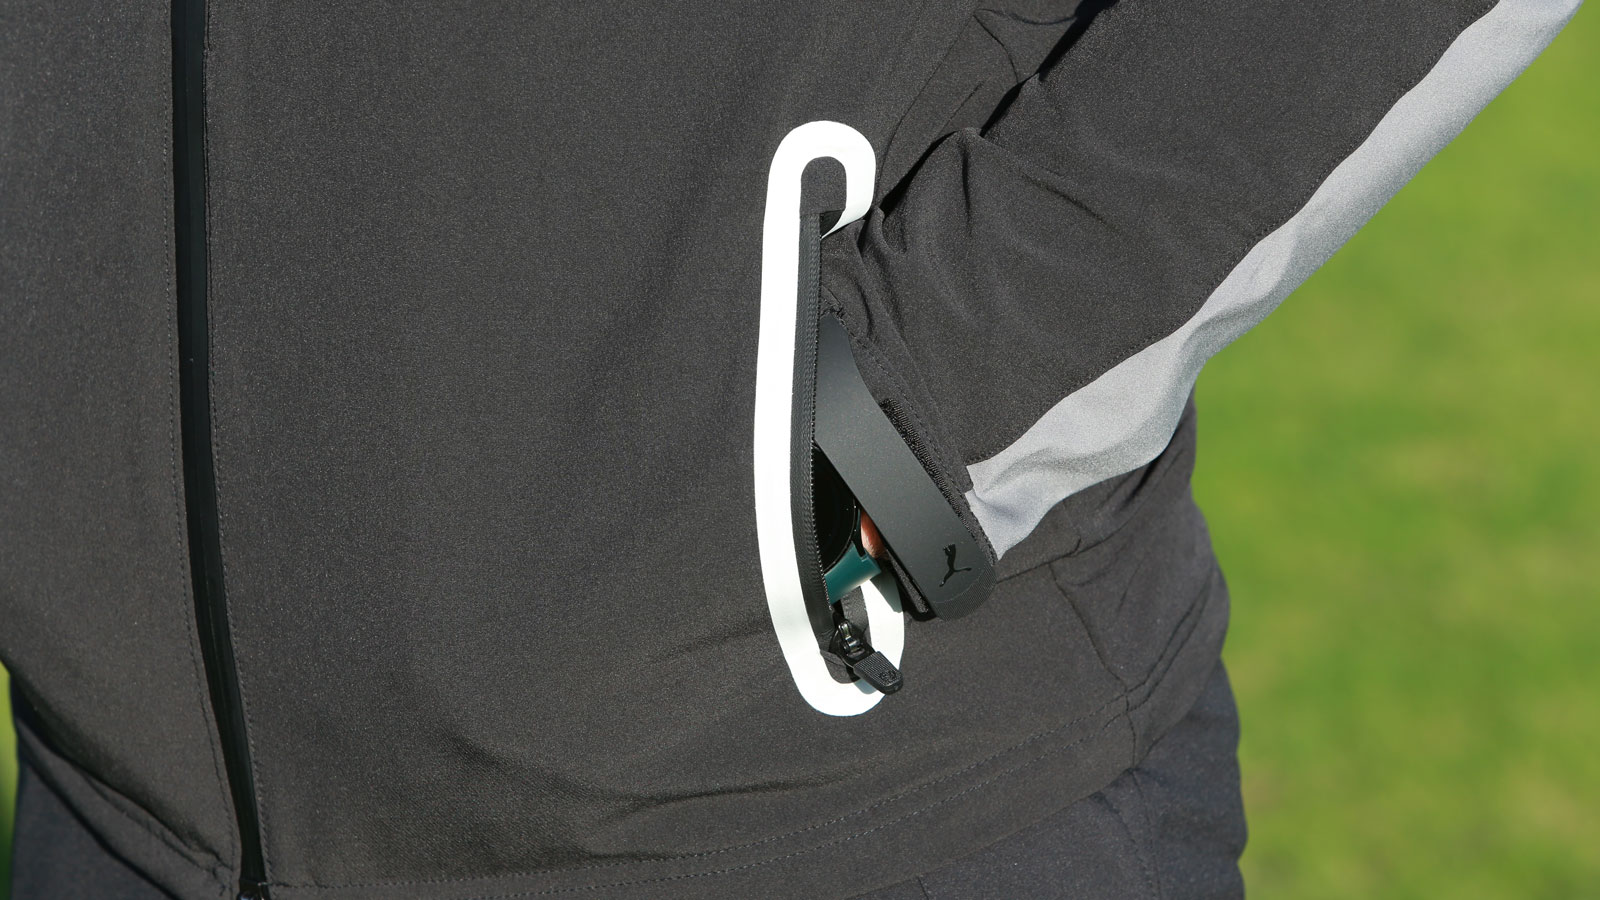 A golfer puts his hand in a pocket